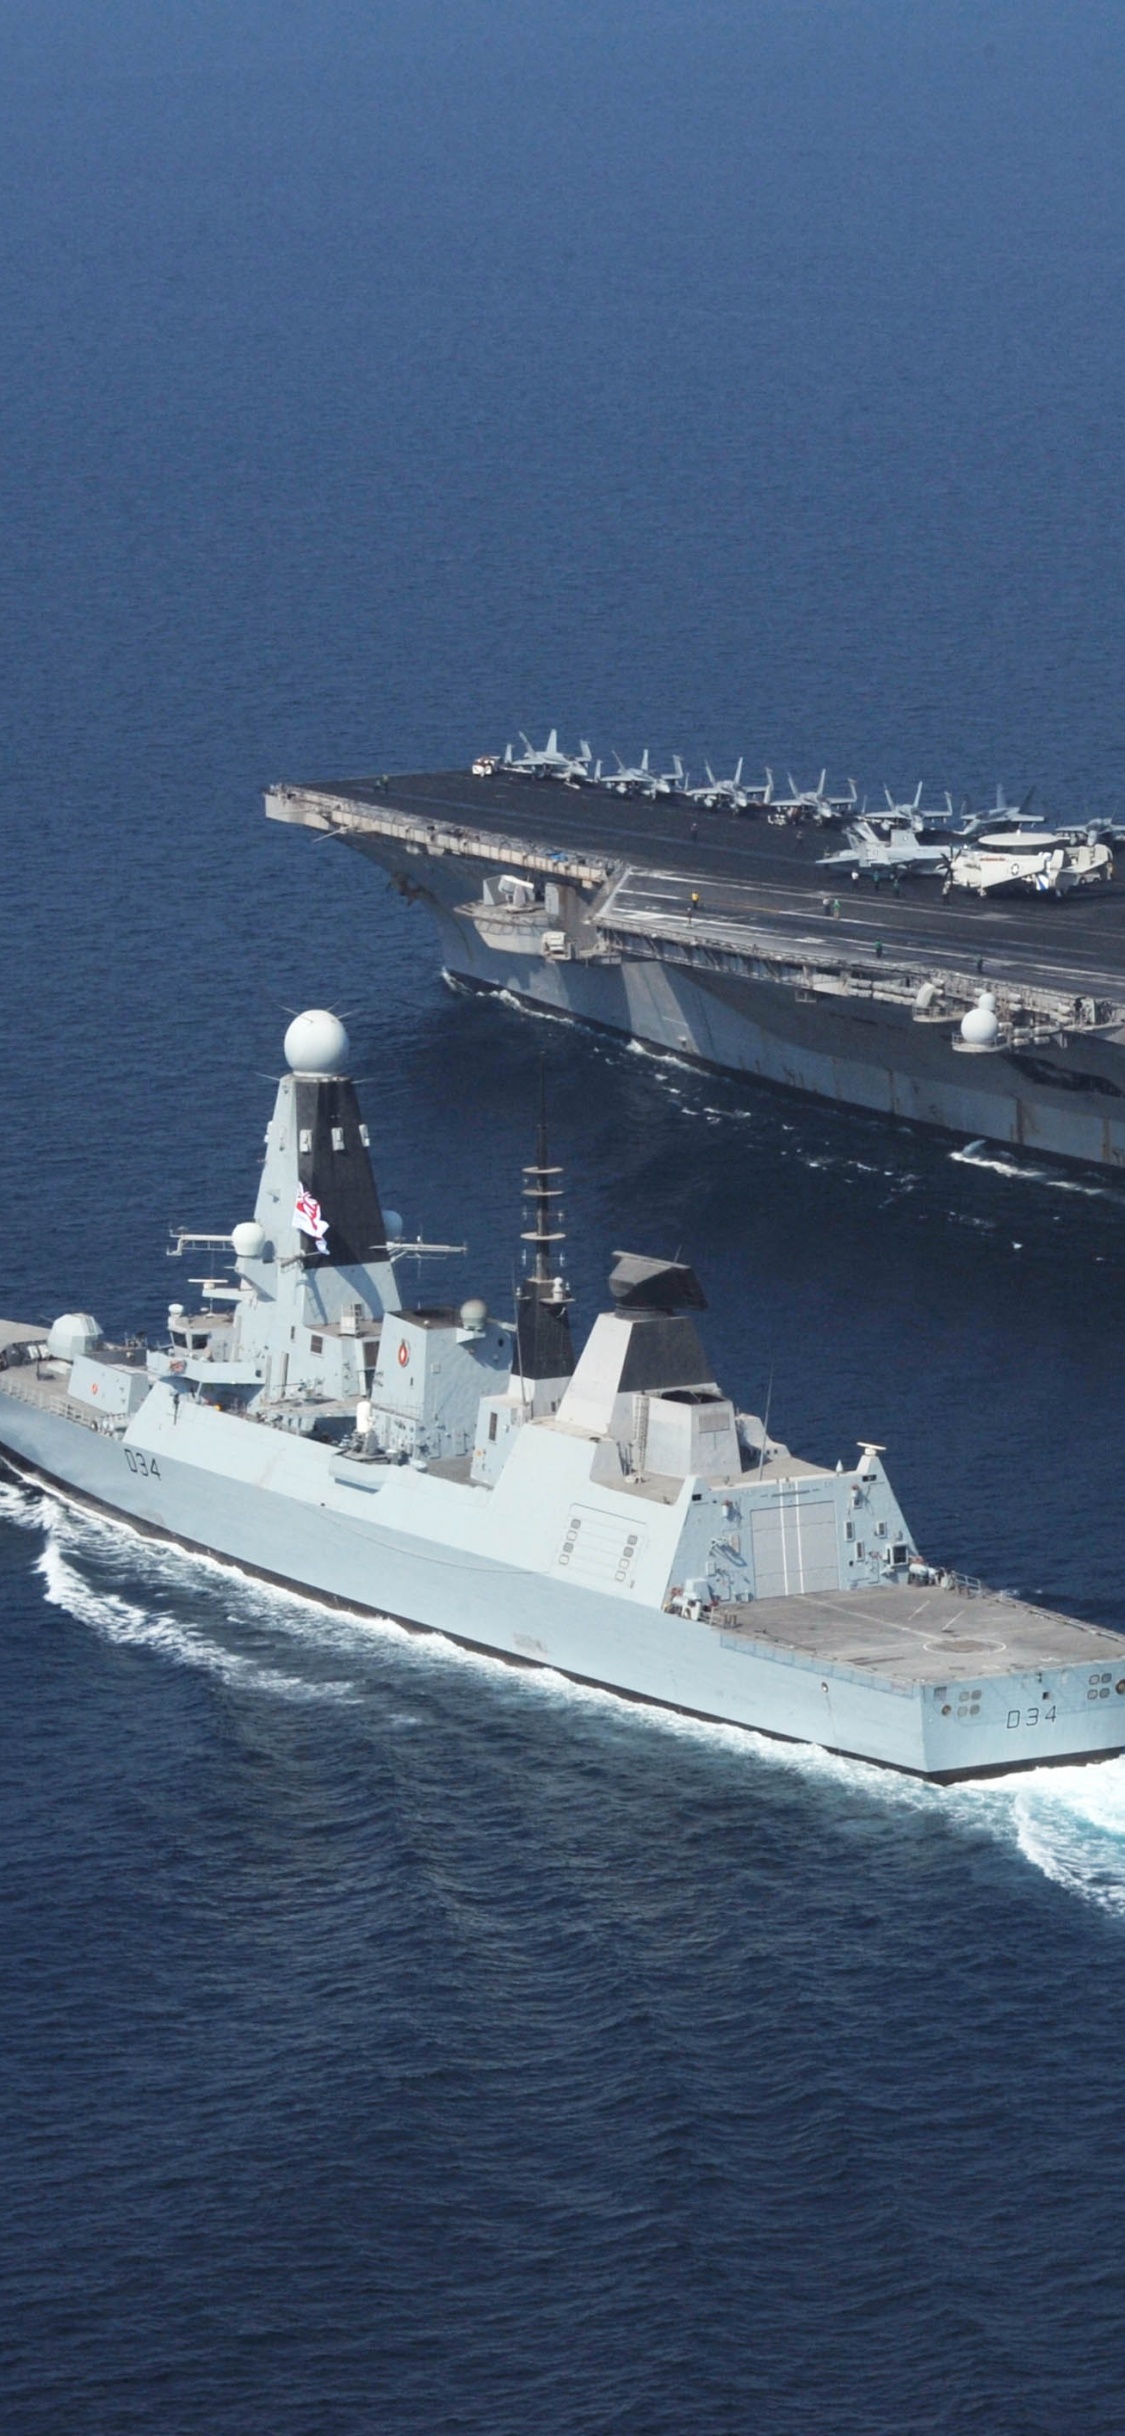 HMS Diamond, Royal Navy, Aircraft Carrier, Destroyer, Warship. Wallpaper in 1125x2436 Resolution